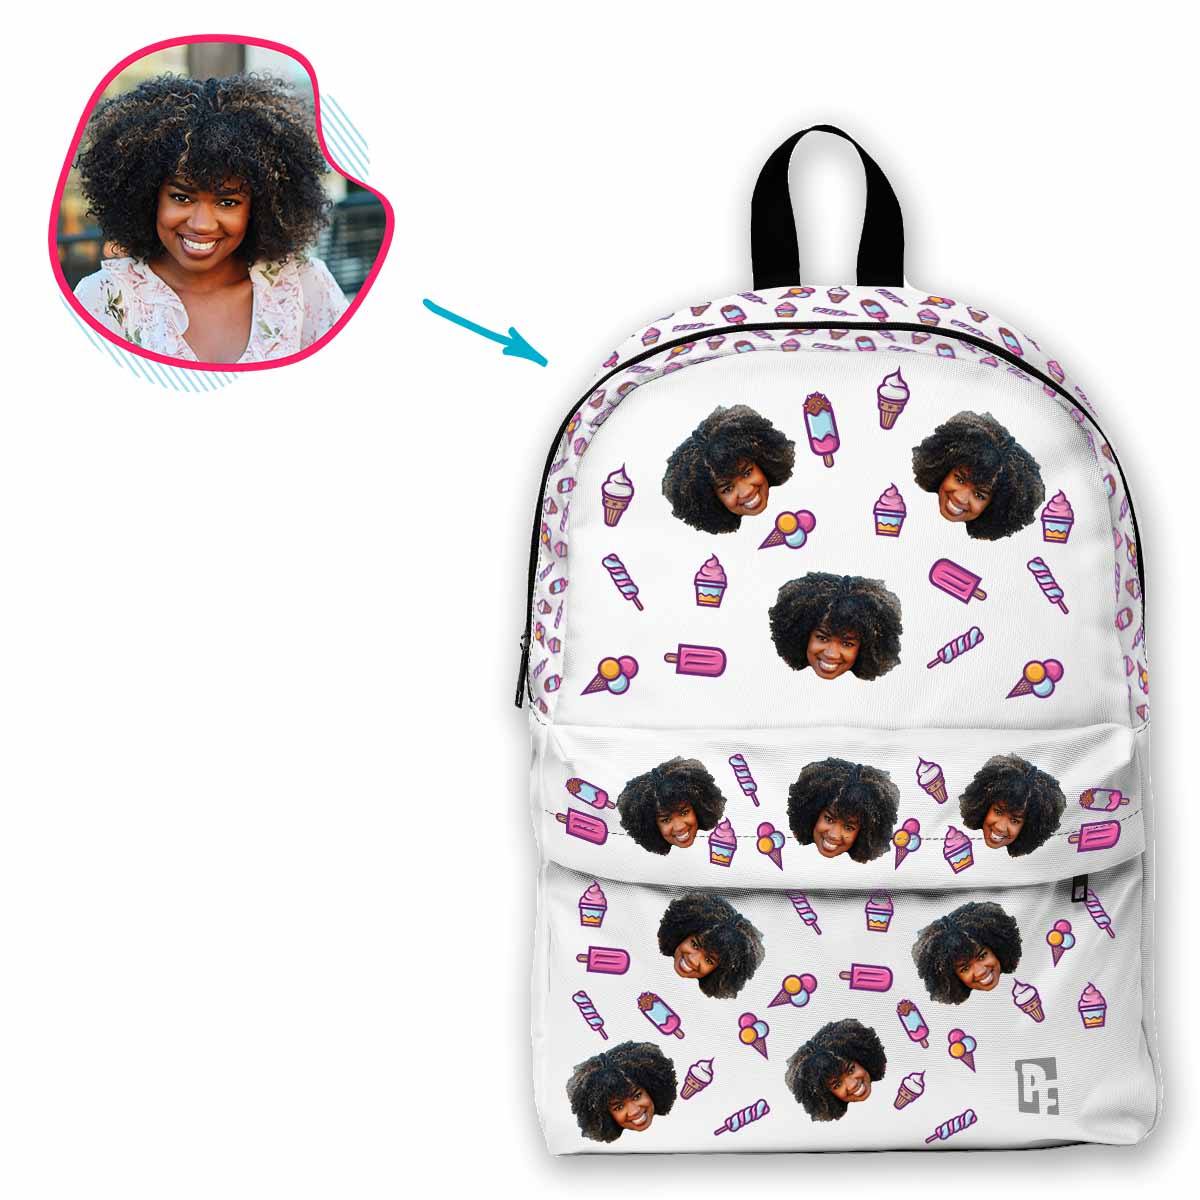 white Candies classic backpack personalized with photo of face printed on it